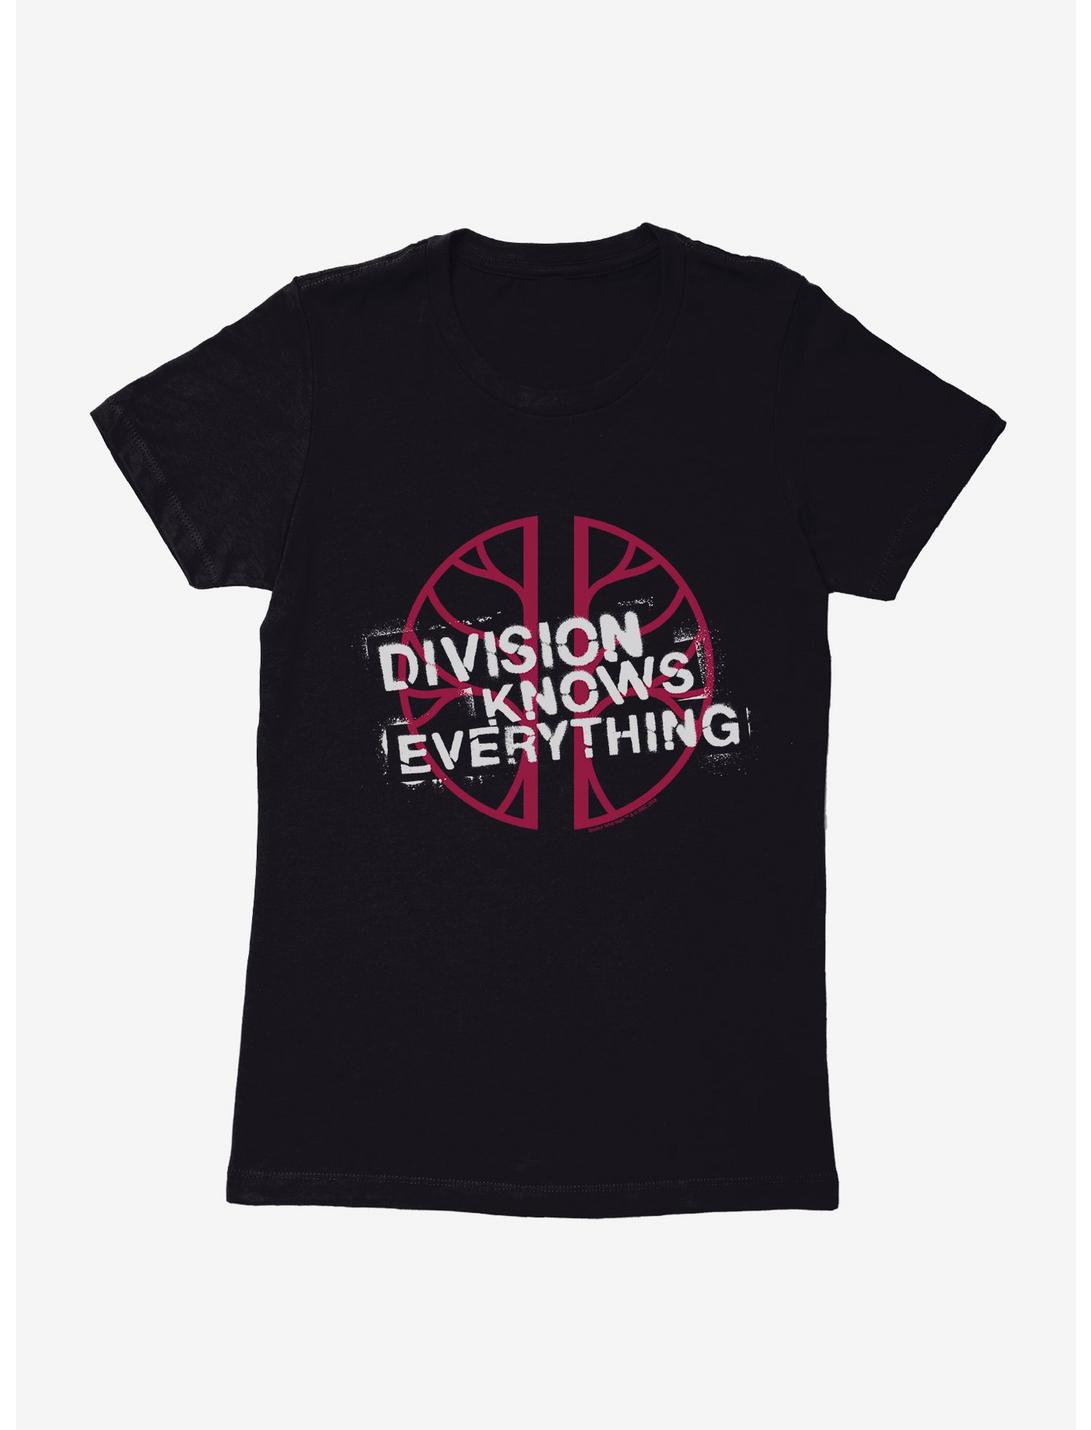 Doctor Who Division Knows Everything Womens T-Shirt, BLACK, hi-res